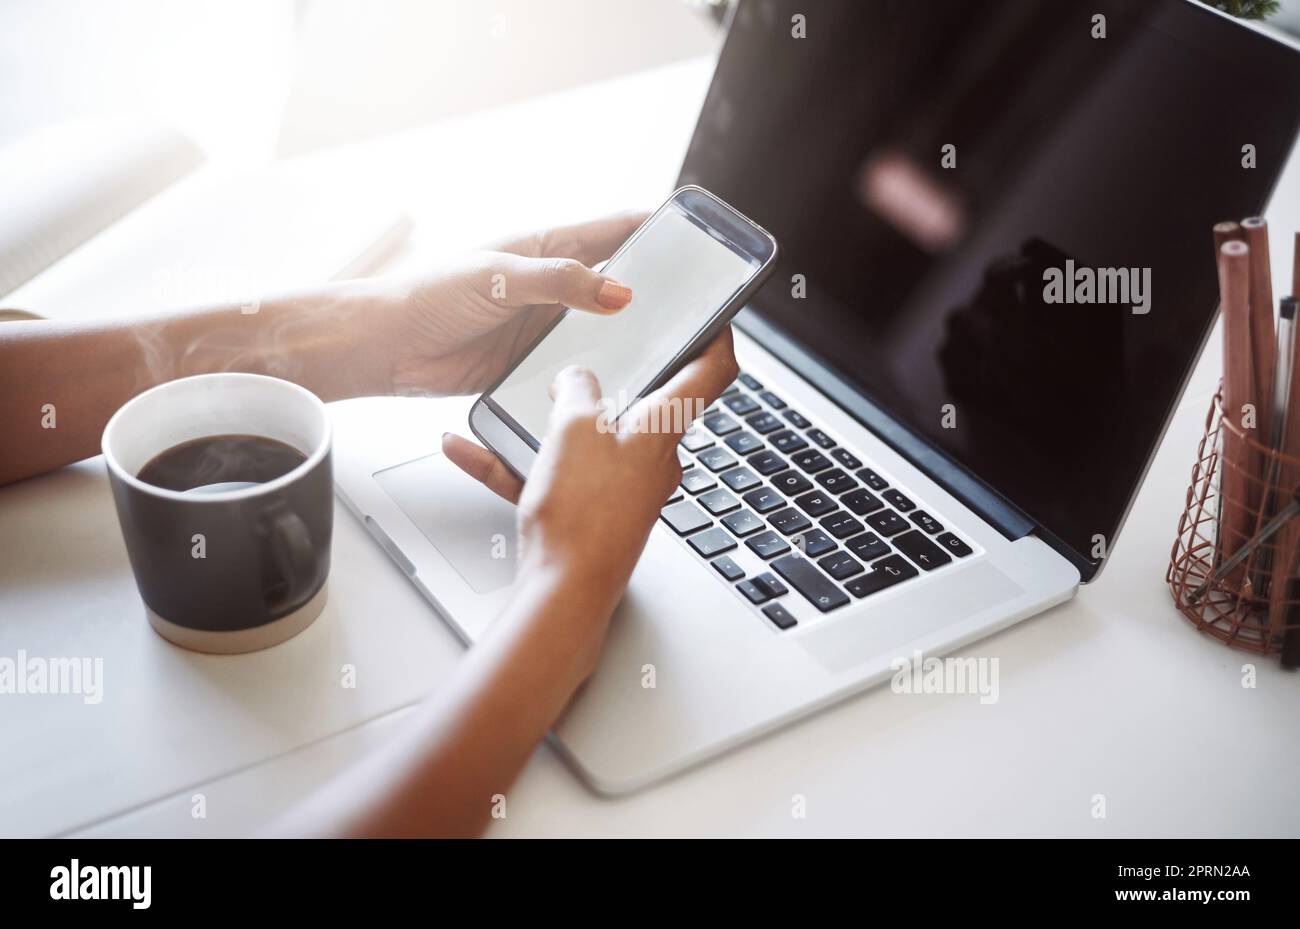 Life of a designer, contacting clients from multiple devices. Closeup shot of an unrecognizable female designer using a cellphone in her home office Stock Photo